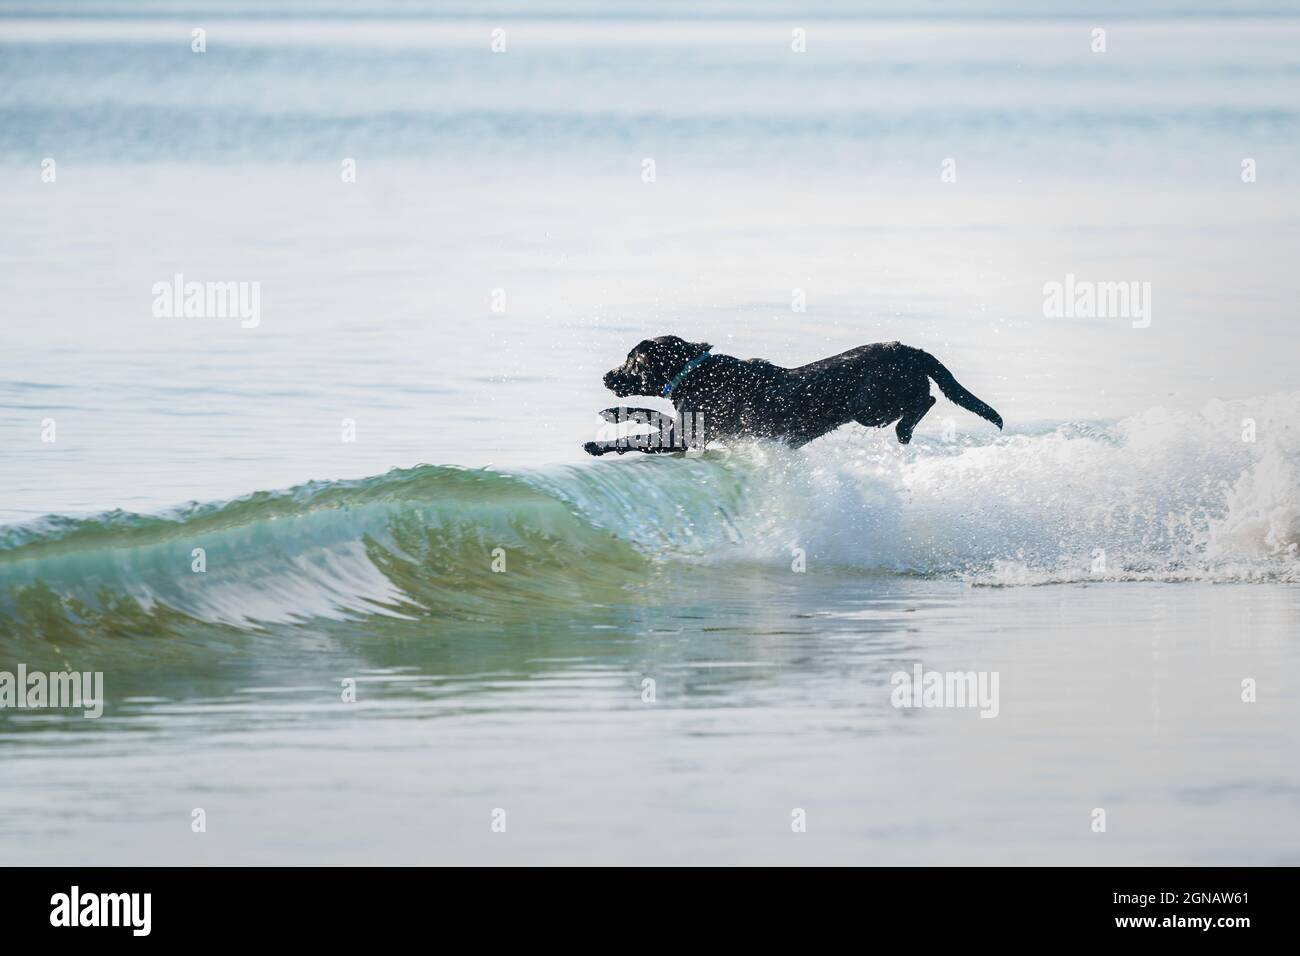 A black dog jumping over the ocean waves Stock Photo